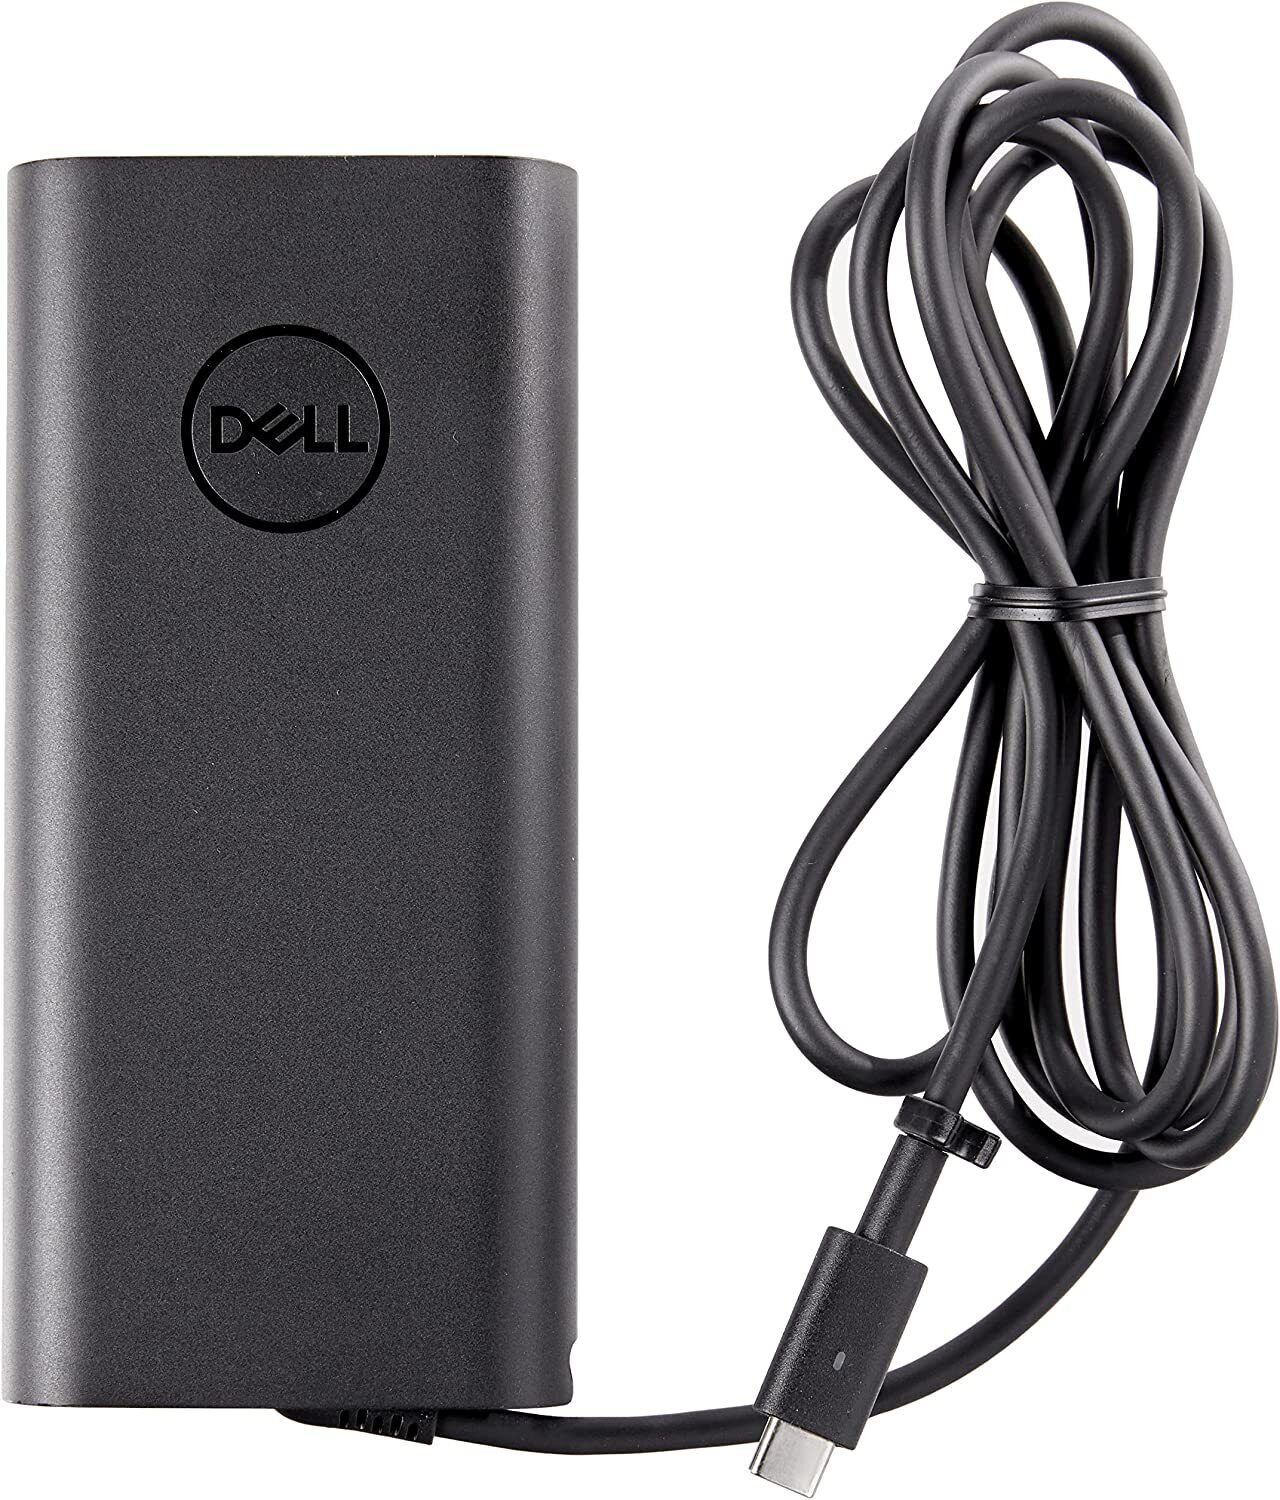 OEM130W USB C Charger for Dell XPS 15 9500 9700 9575 T4V18 Laptop Type-C